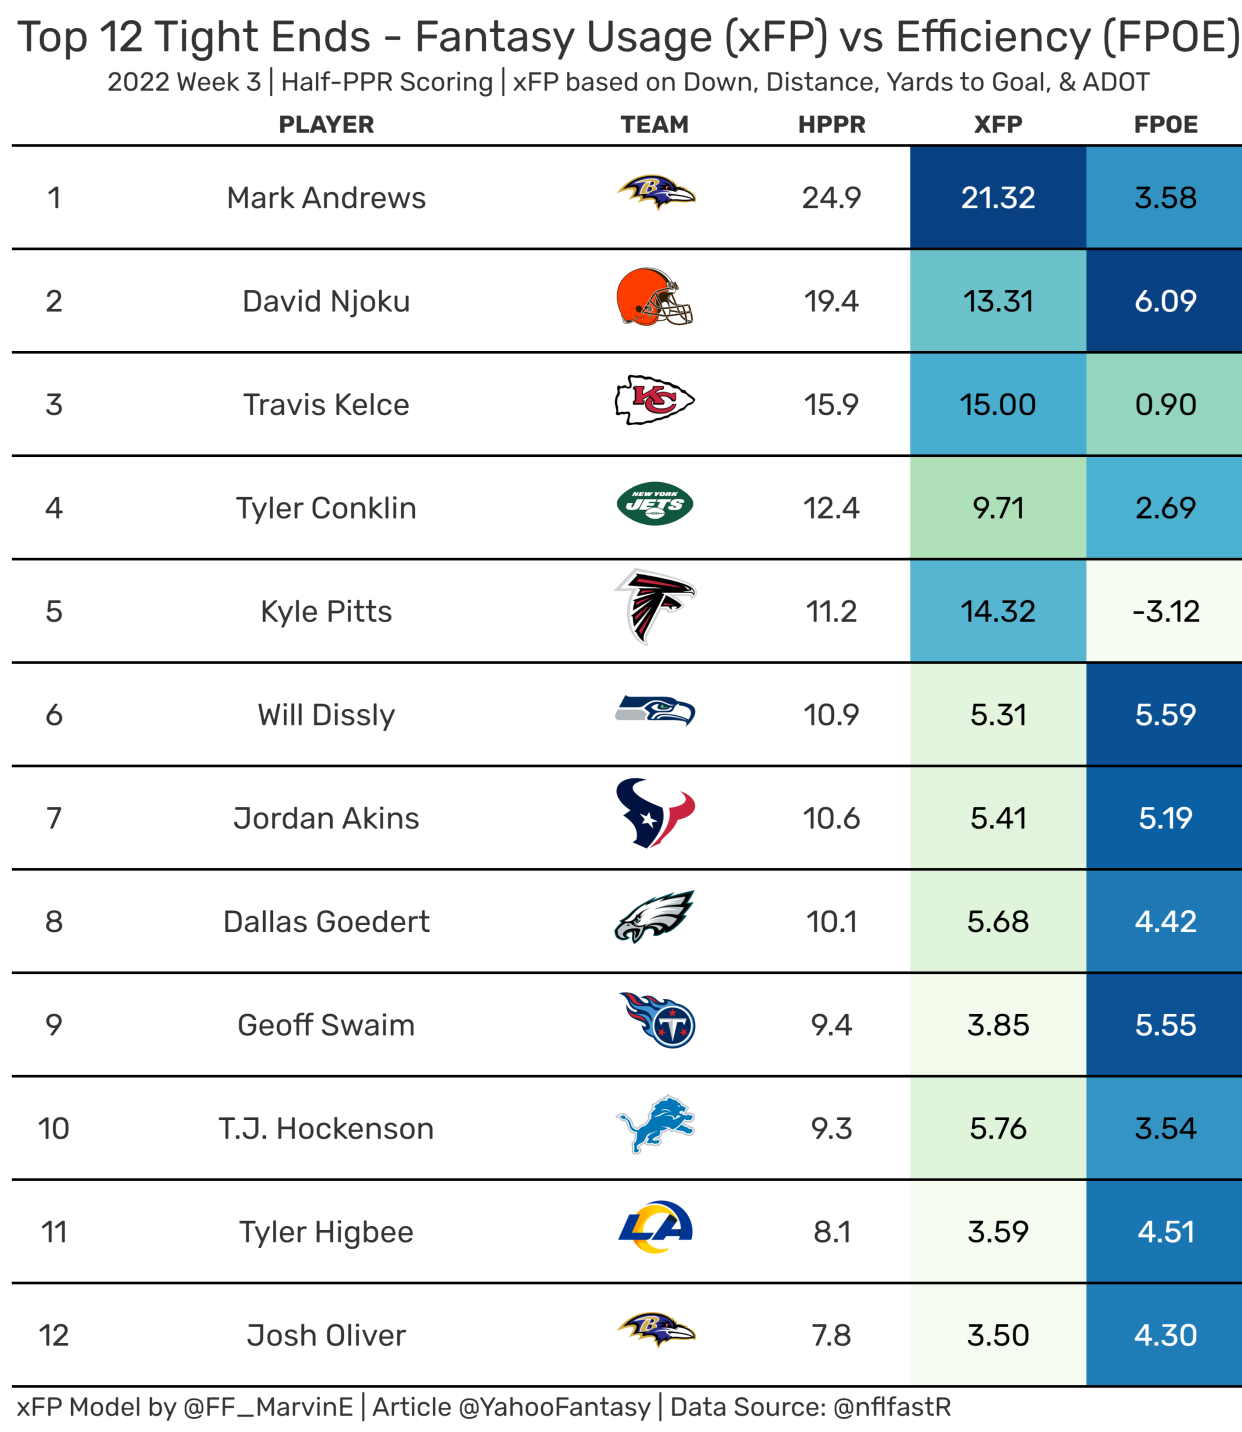 Top-12 Fantasy Tight Ends from Week 3. (Data used provided by nflfastR)